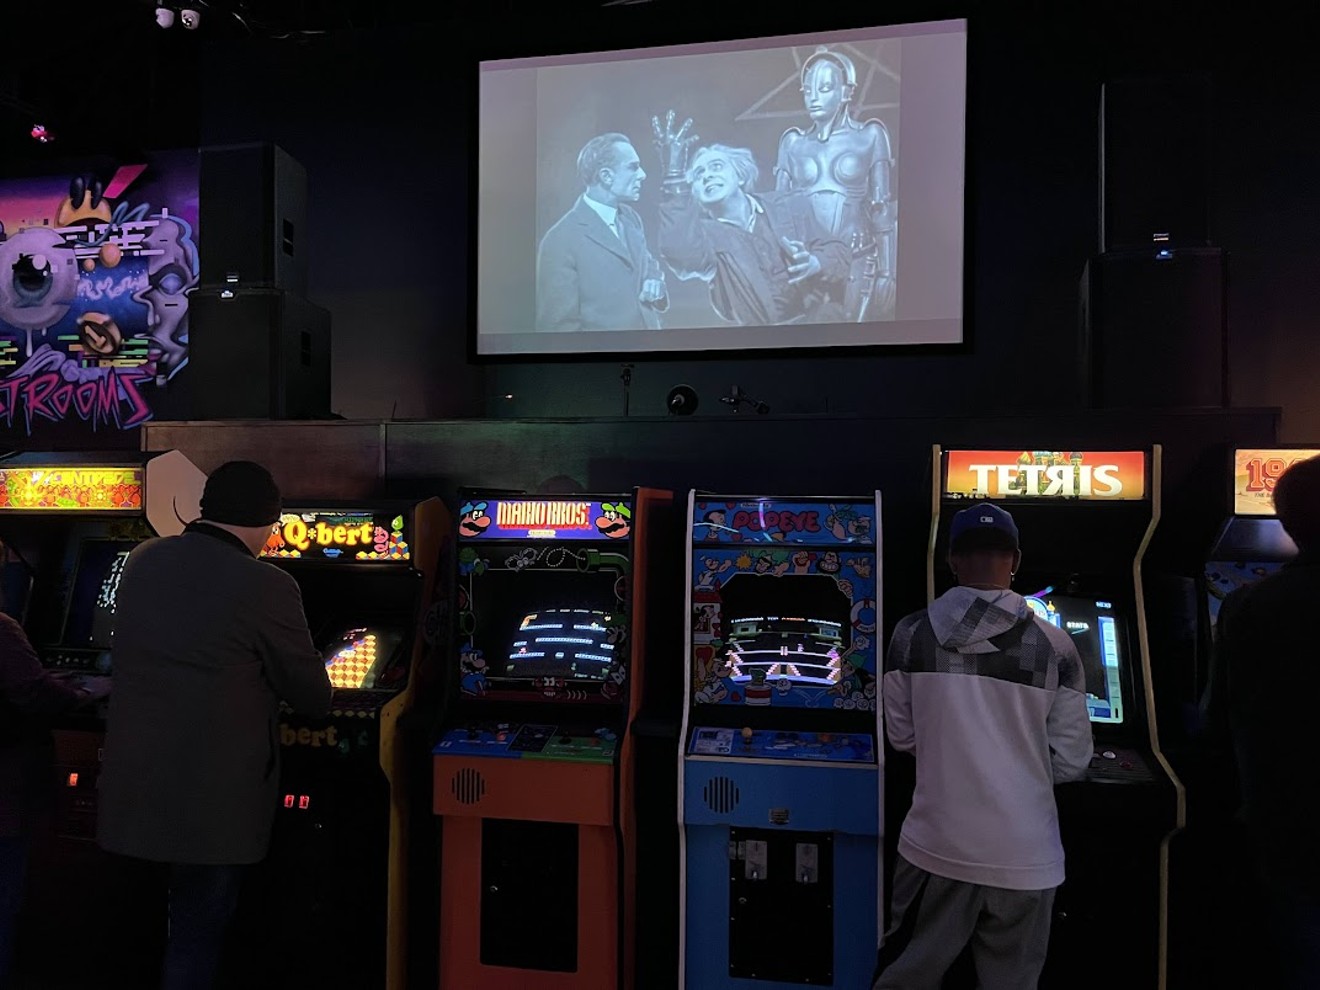 An overhead screen at Free Play Dallas in Trinity Groves plays the classic sci-fi film Metropolis as players try to get the high score on classic arcade machines.